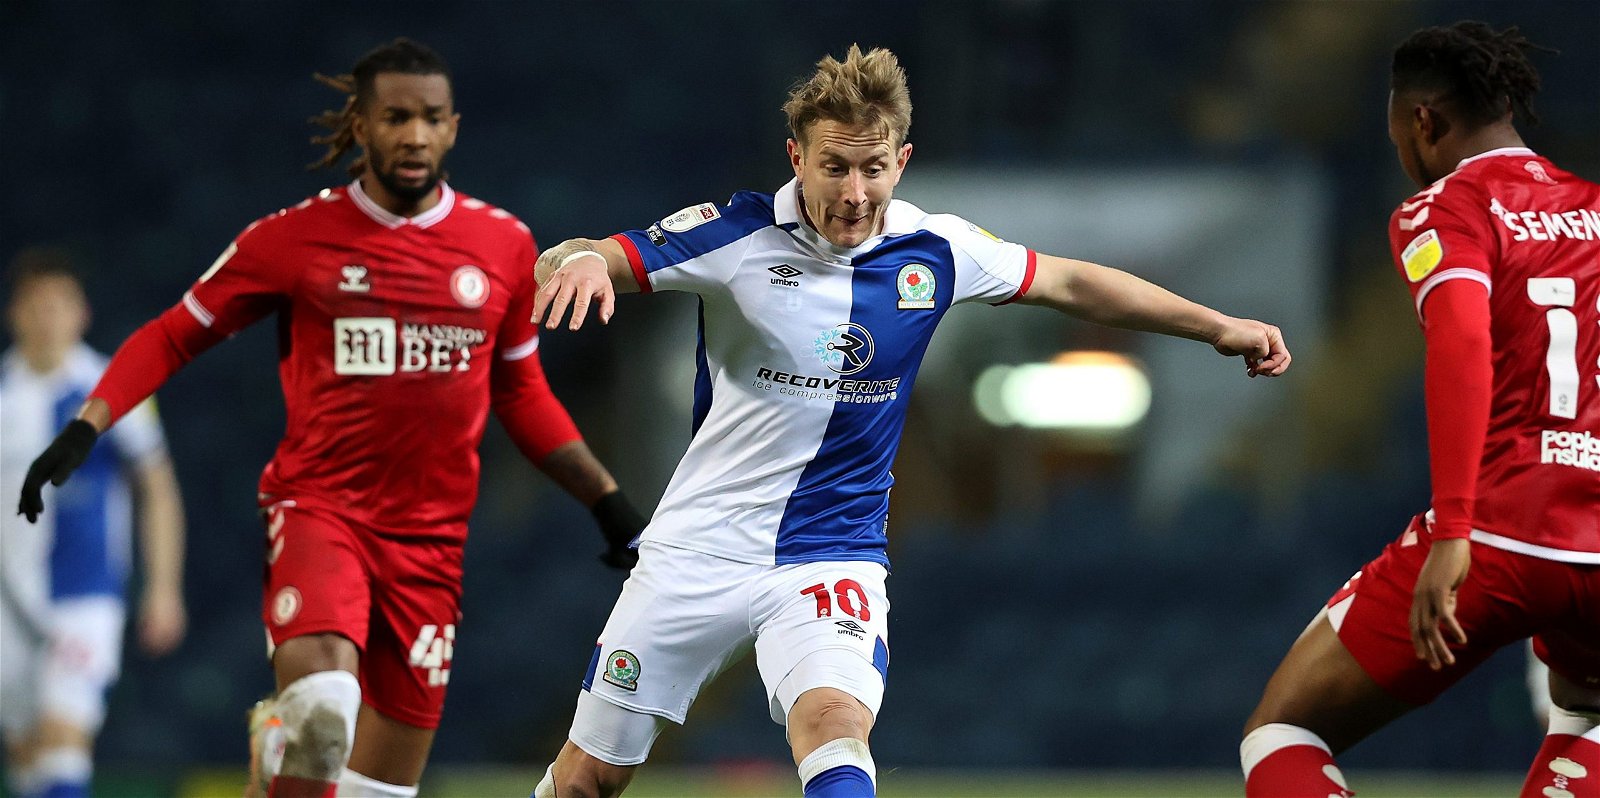 , Blackburn Rovers boss &#8216;provides insight&#8217; into 30-y/o ace&#8217;s contract situation &#8211; expiring this summer